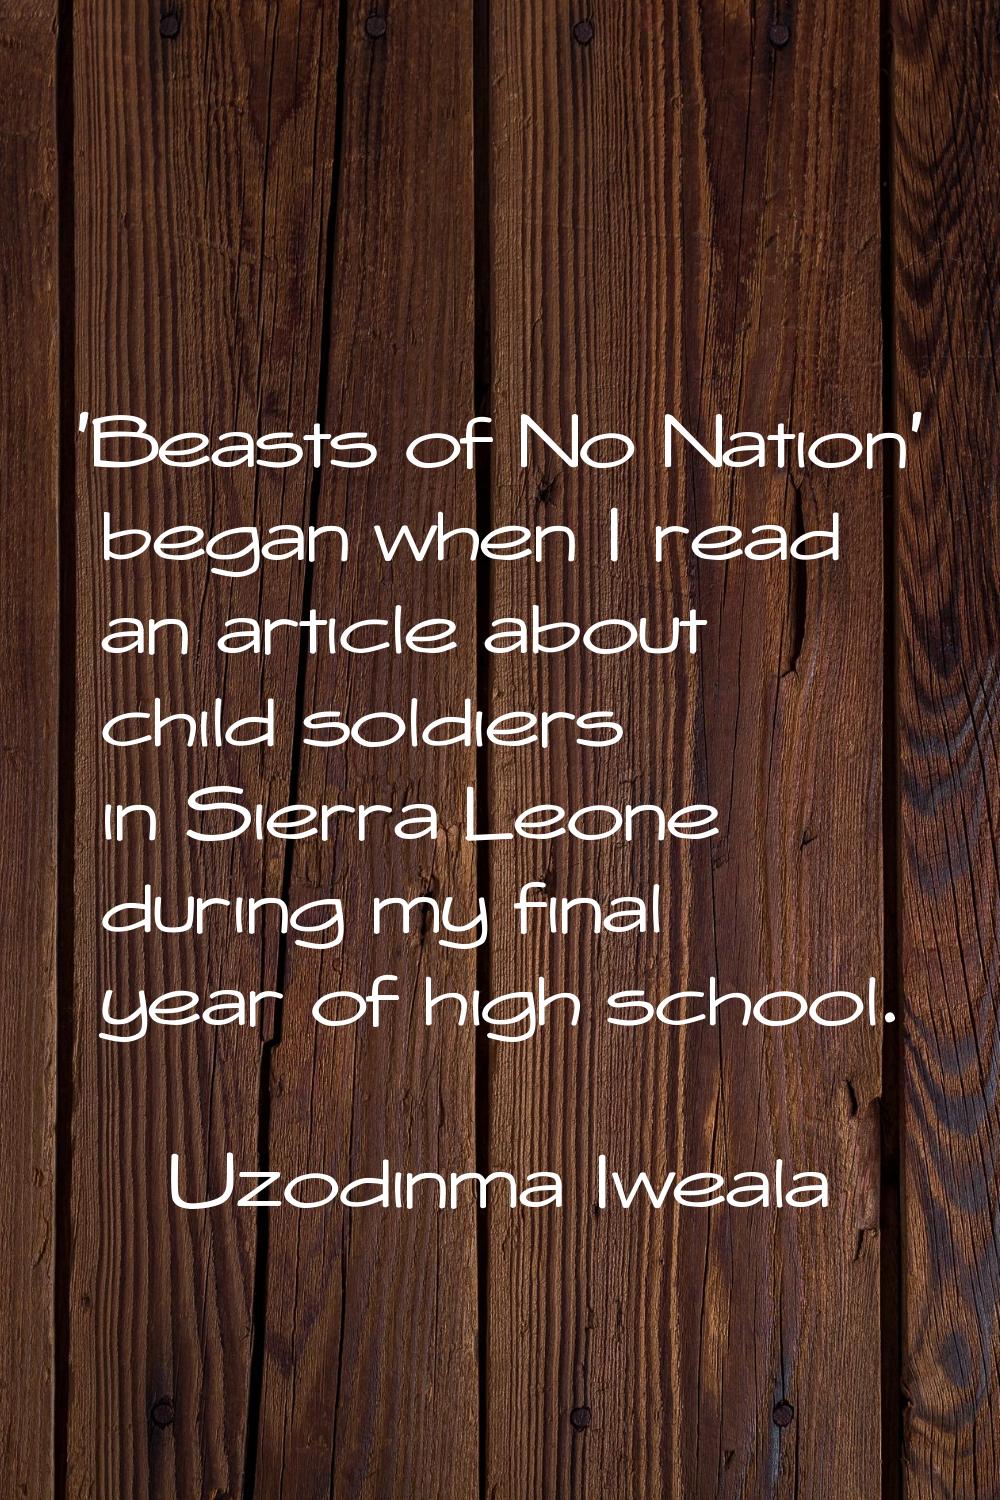 'Beasts of No Nation' began when I read an article about child soldiers in Sierra Leone during my f